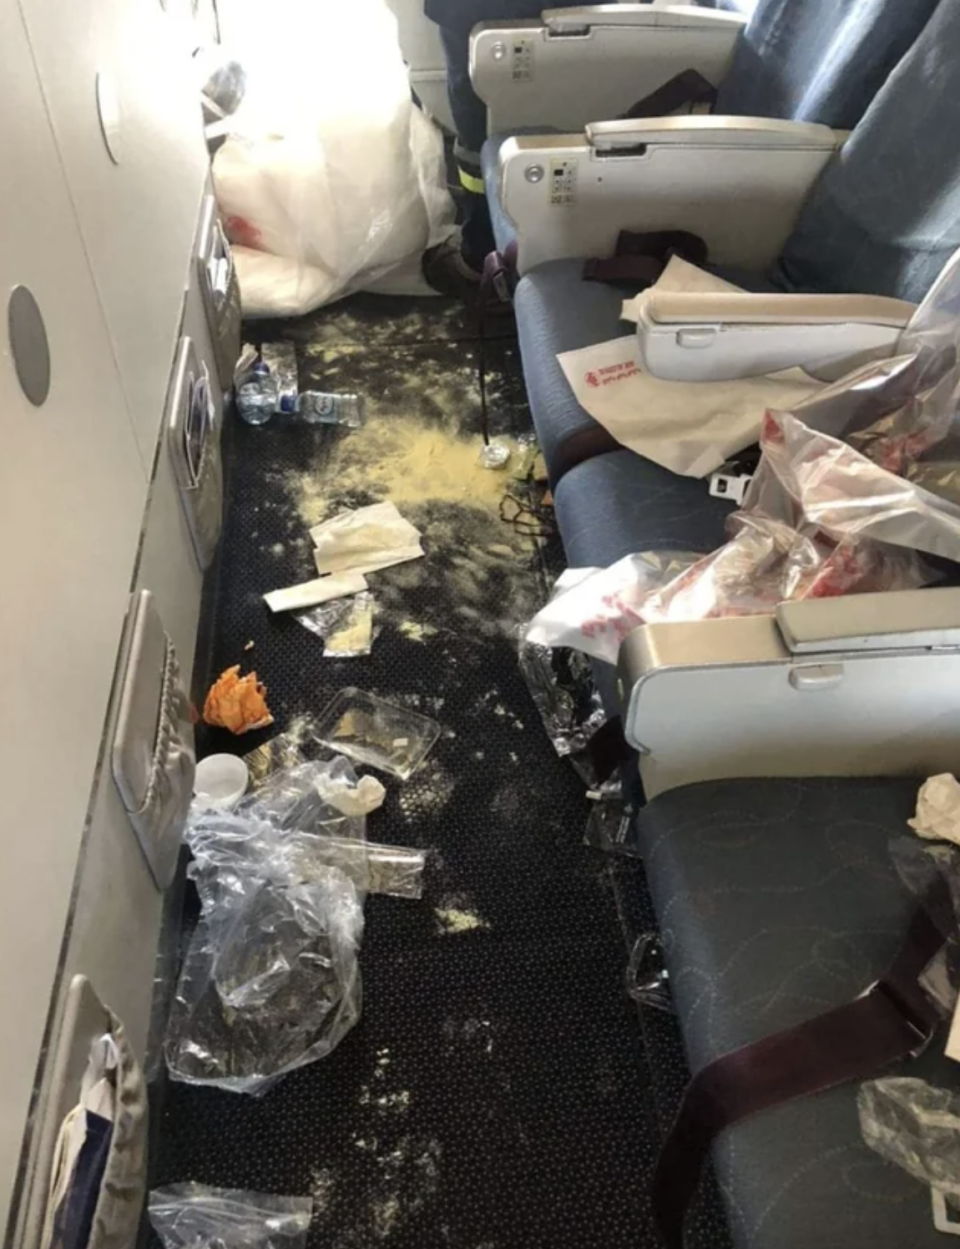 trash all over an airplane